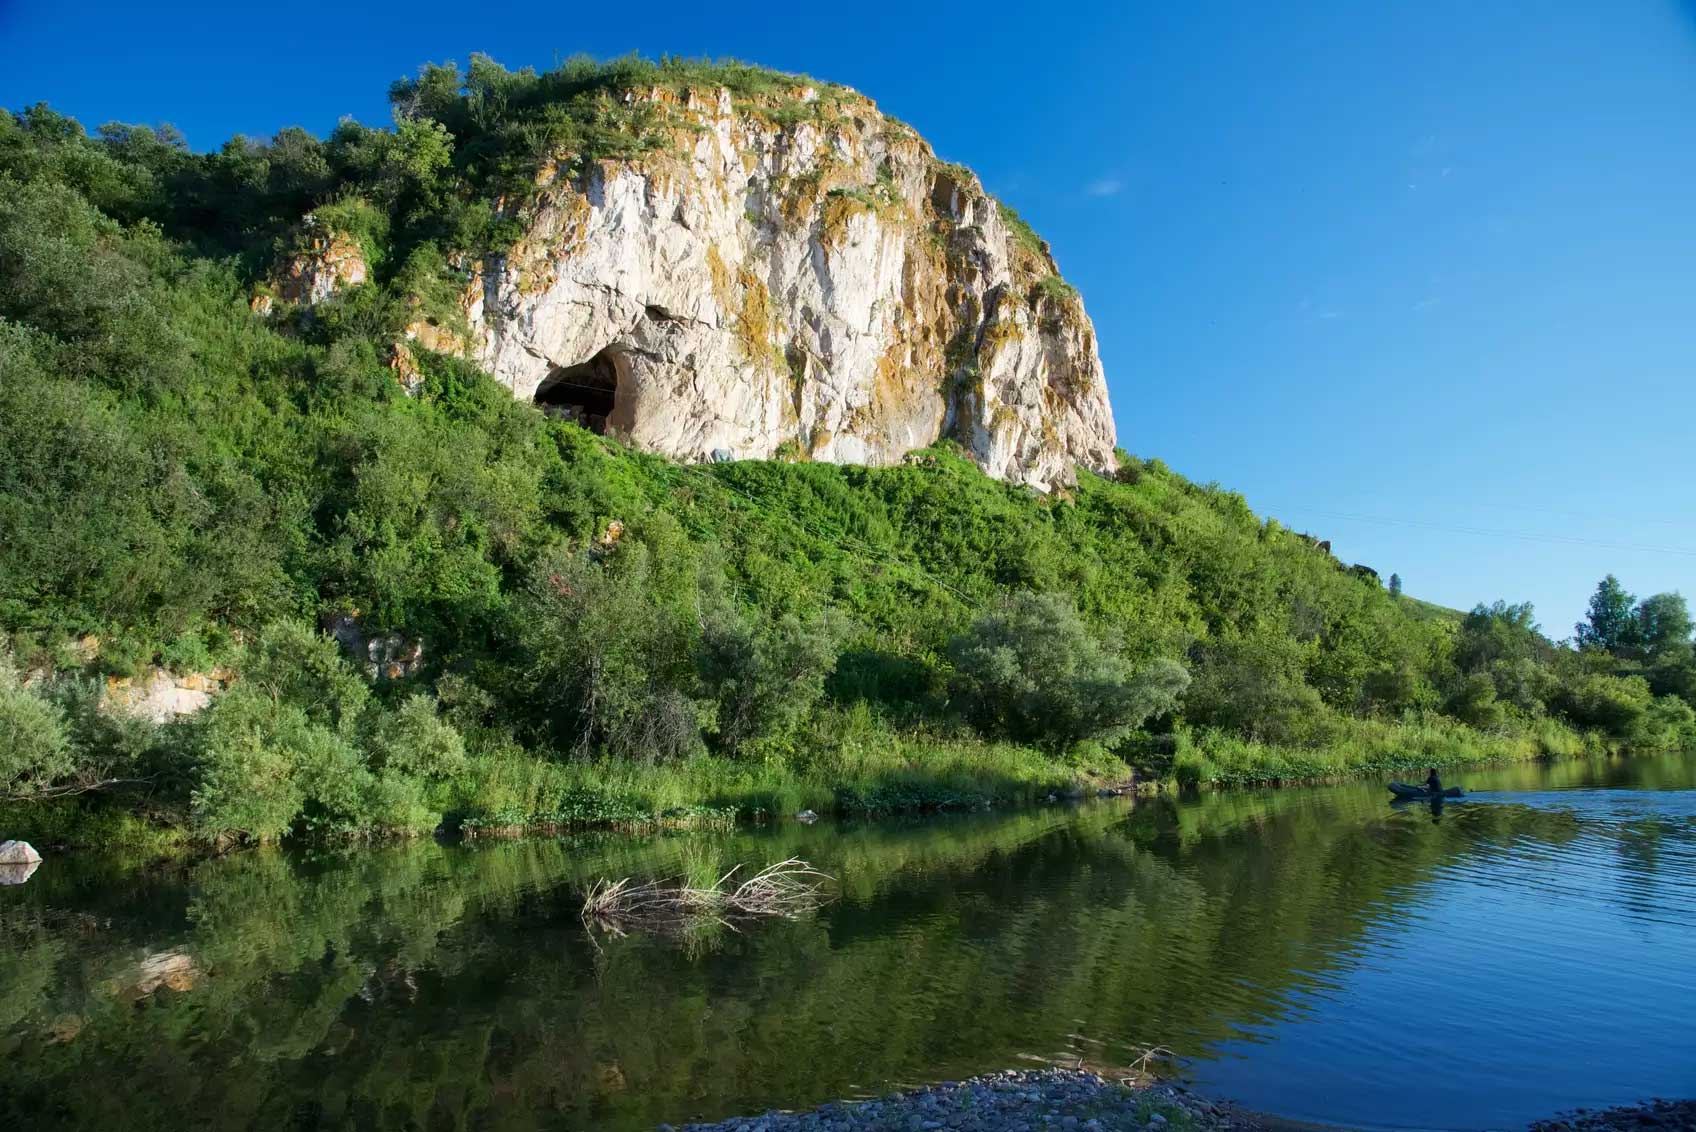 Chagyrskaya Cave in a sheer limestone cliff overlooking a river with blue sky